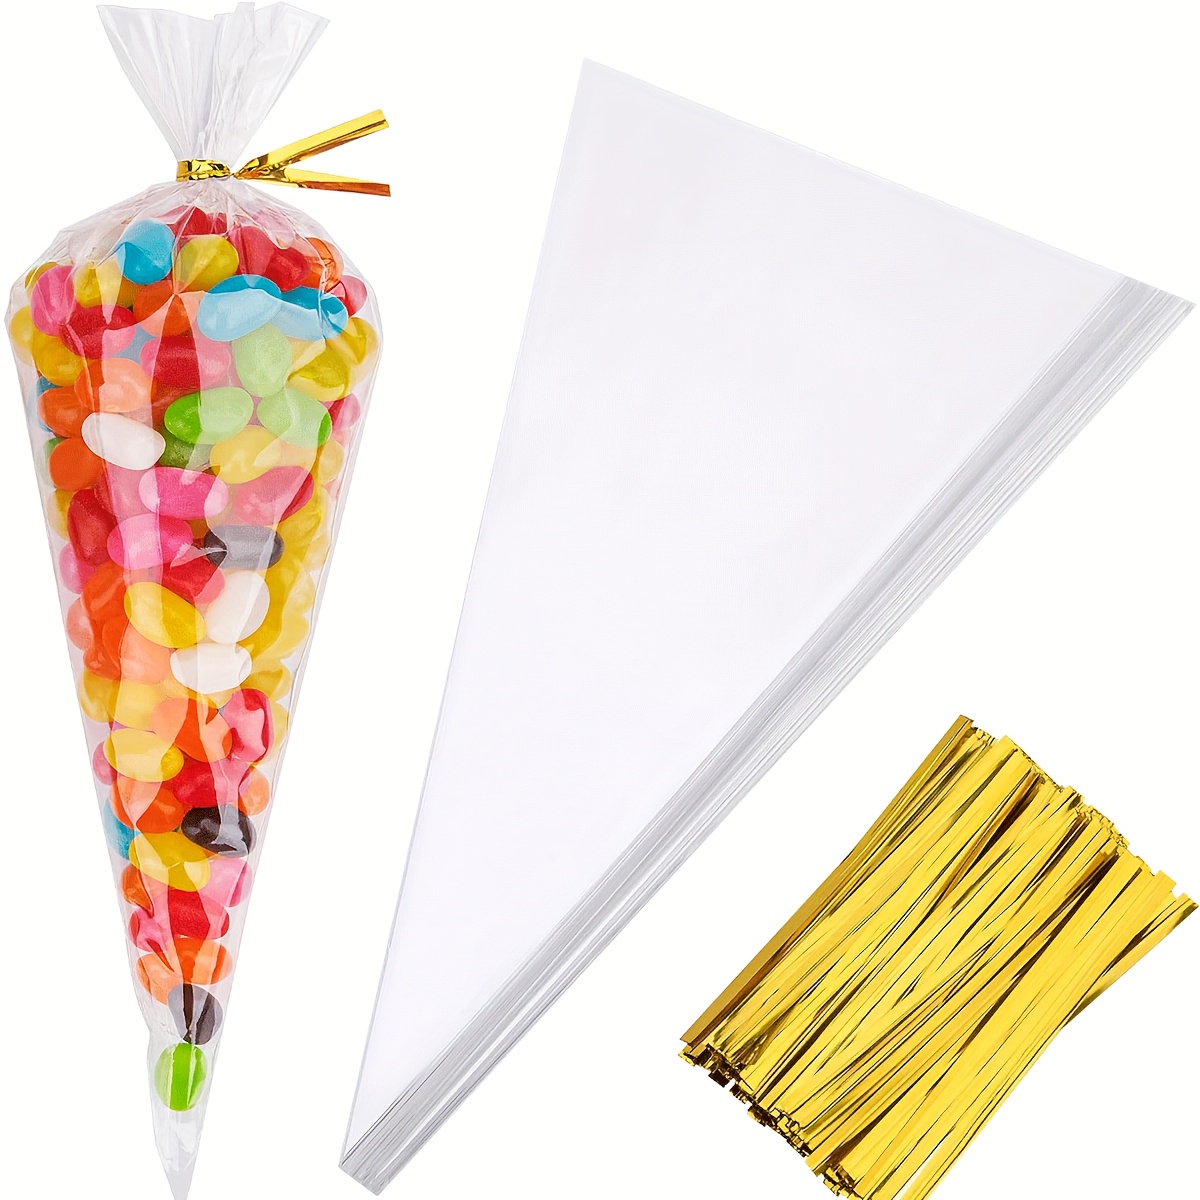 100PCS Clear Cellophane Treat Bags 8 X 12 Clear Resealable Flat Cello  Bags Sweet Party Gift Bags OPP Plastic Bag with Mix Colors Ribbons Bows for